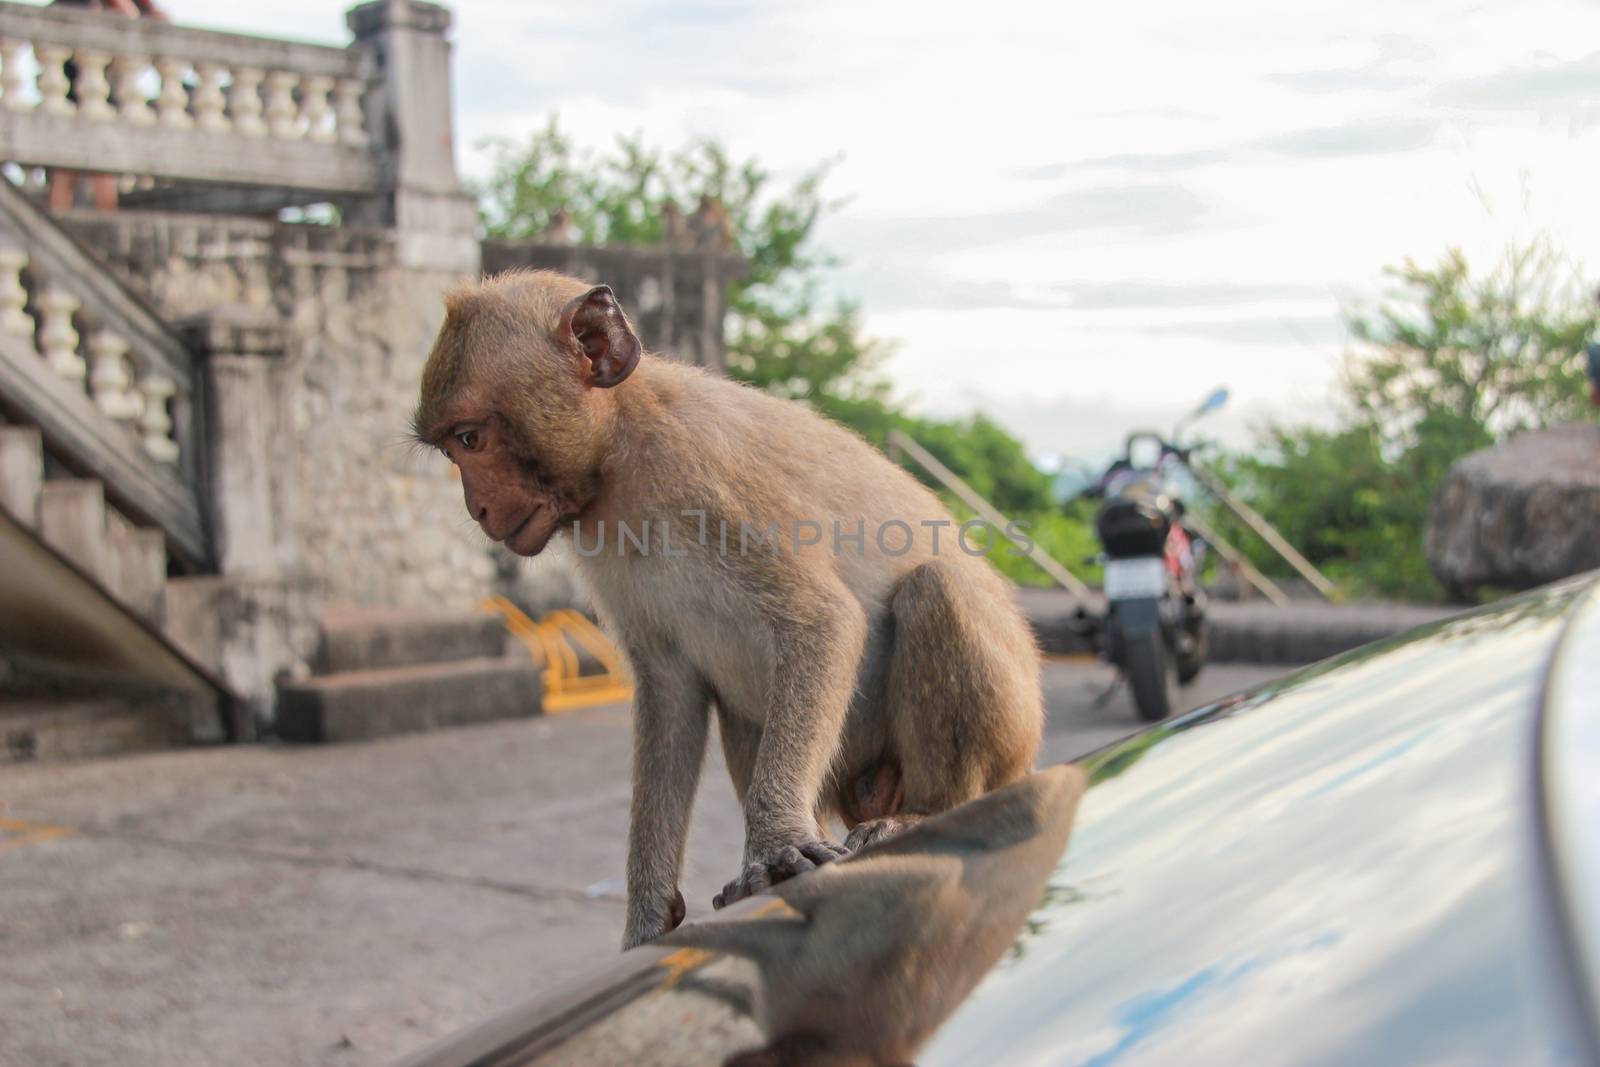 monkey is sitting in front of the automobile mirror.